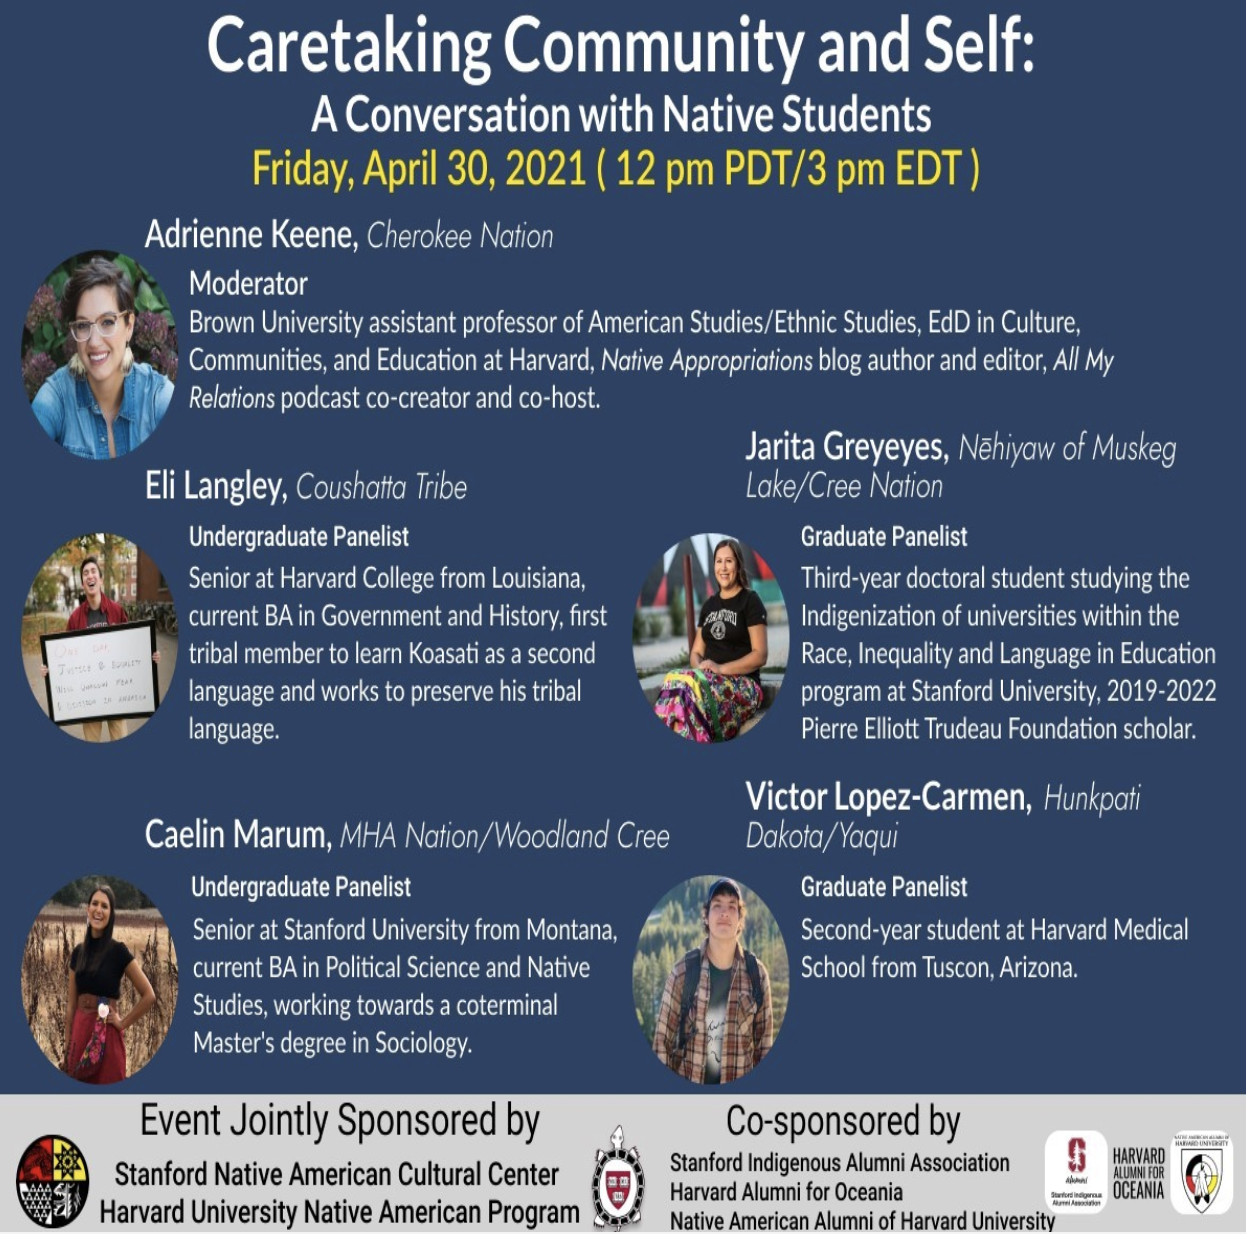 Caretaking Community and Self event flyer featuring panel of speakers.